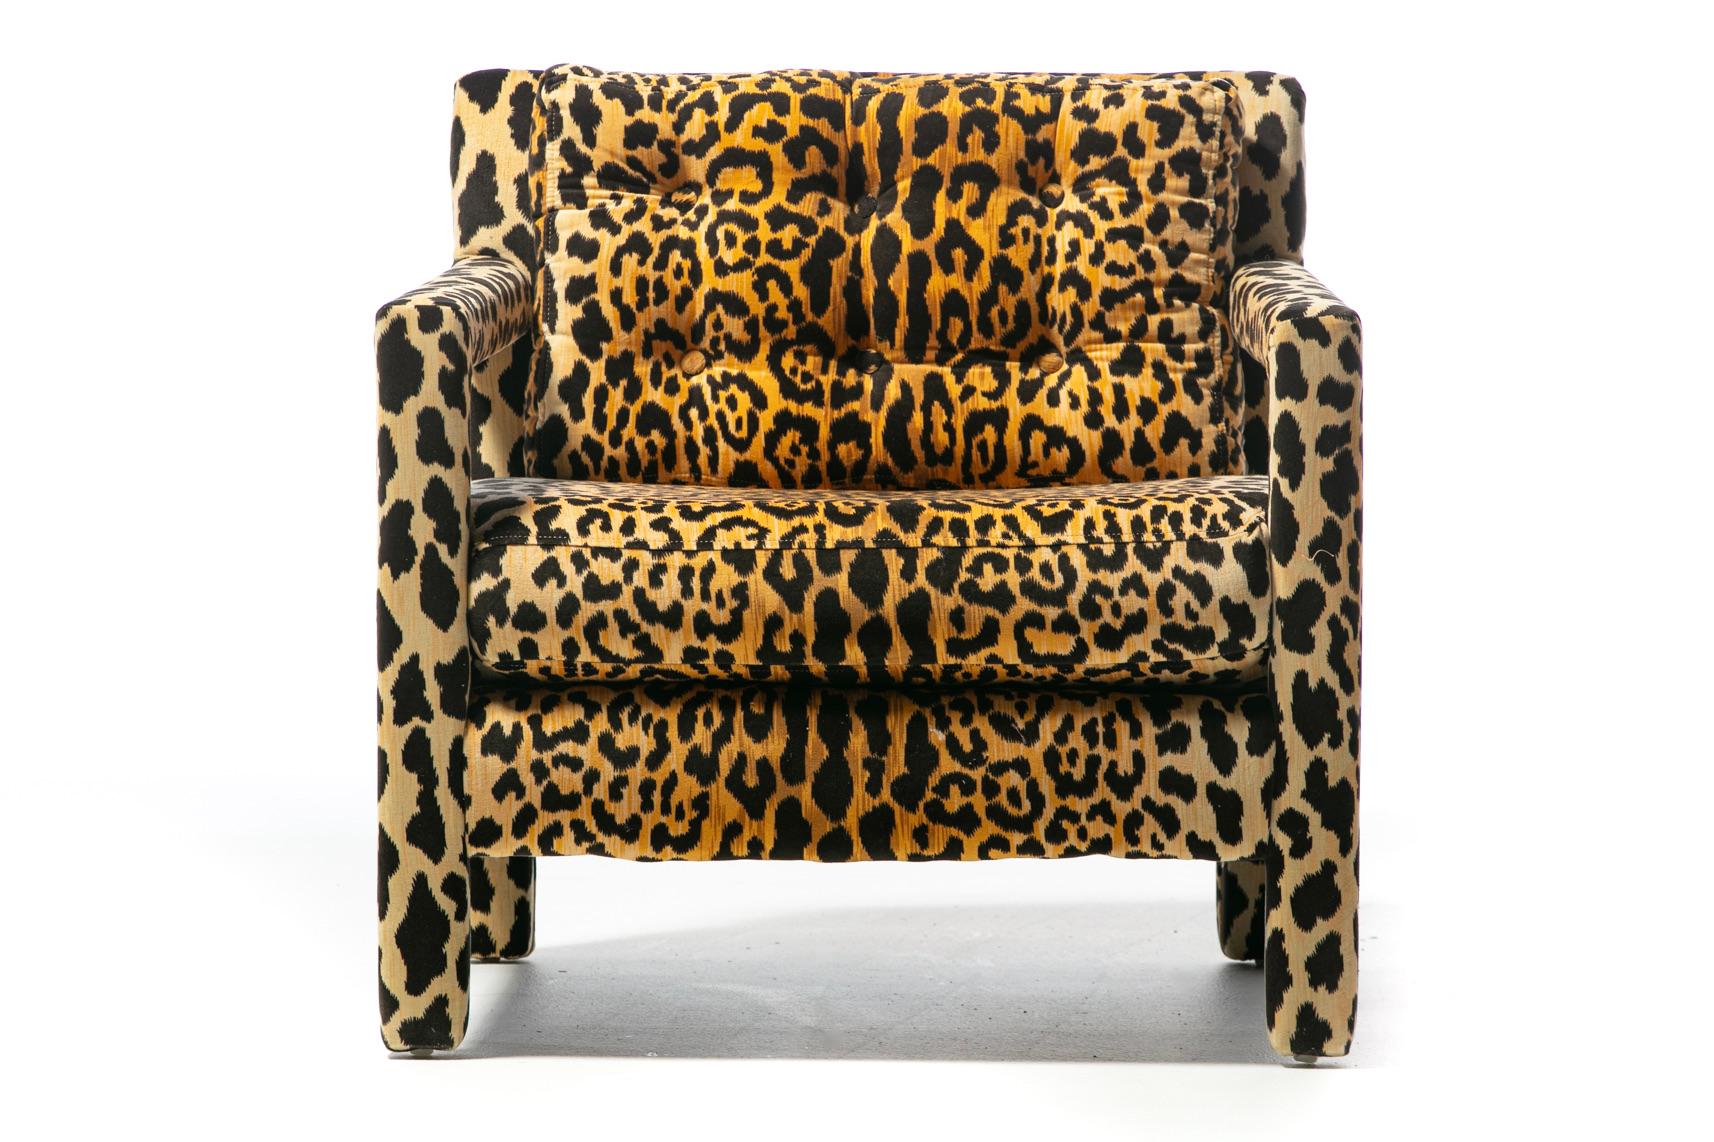 Pair of Milo Baughman Style Mid Century Parsons Chairs in Leopard Velvet c. 1970 For Sale 1